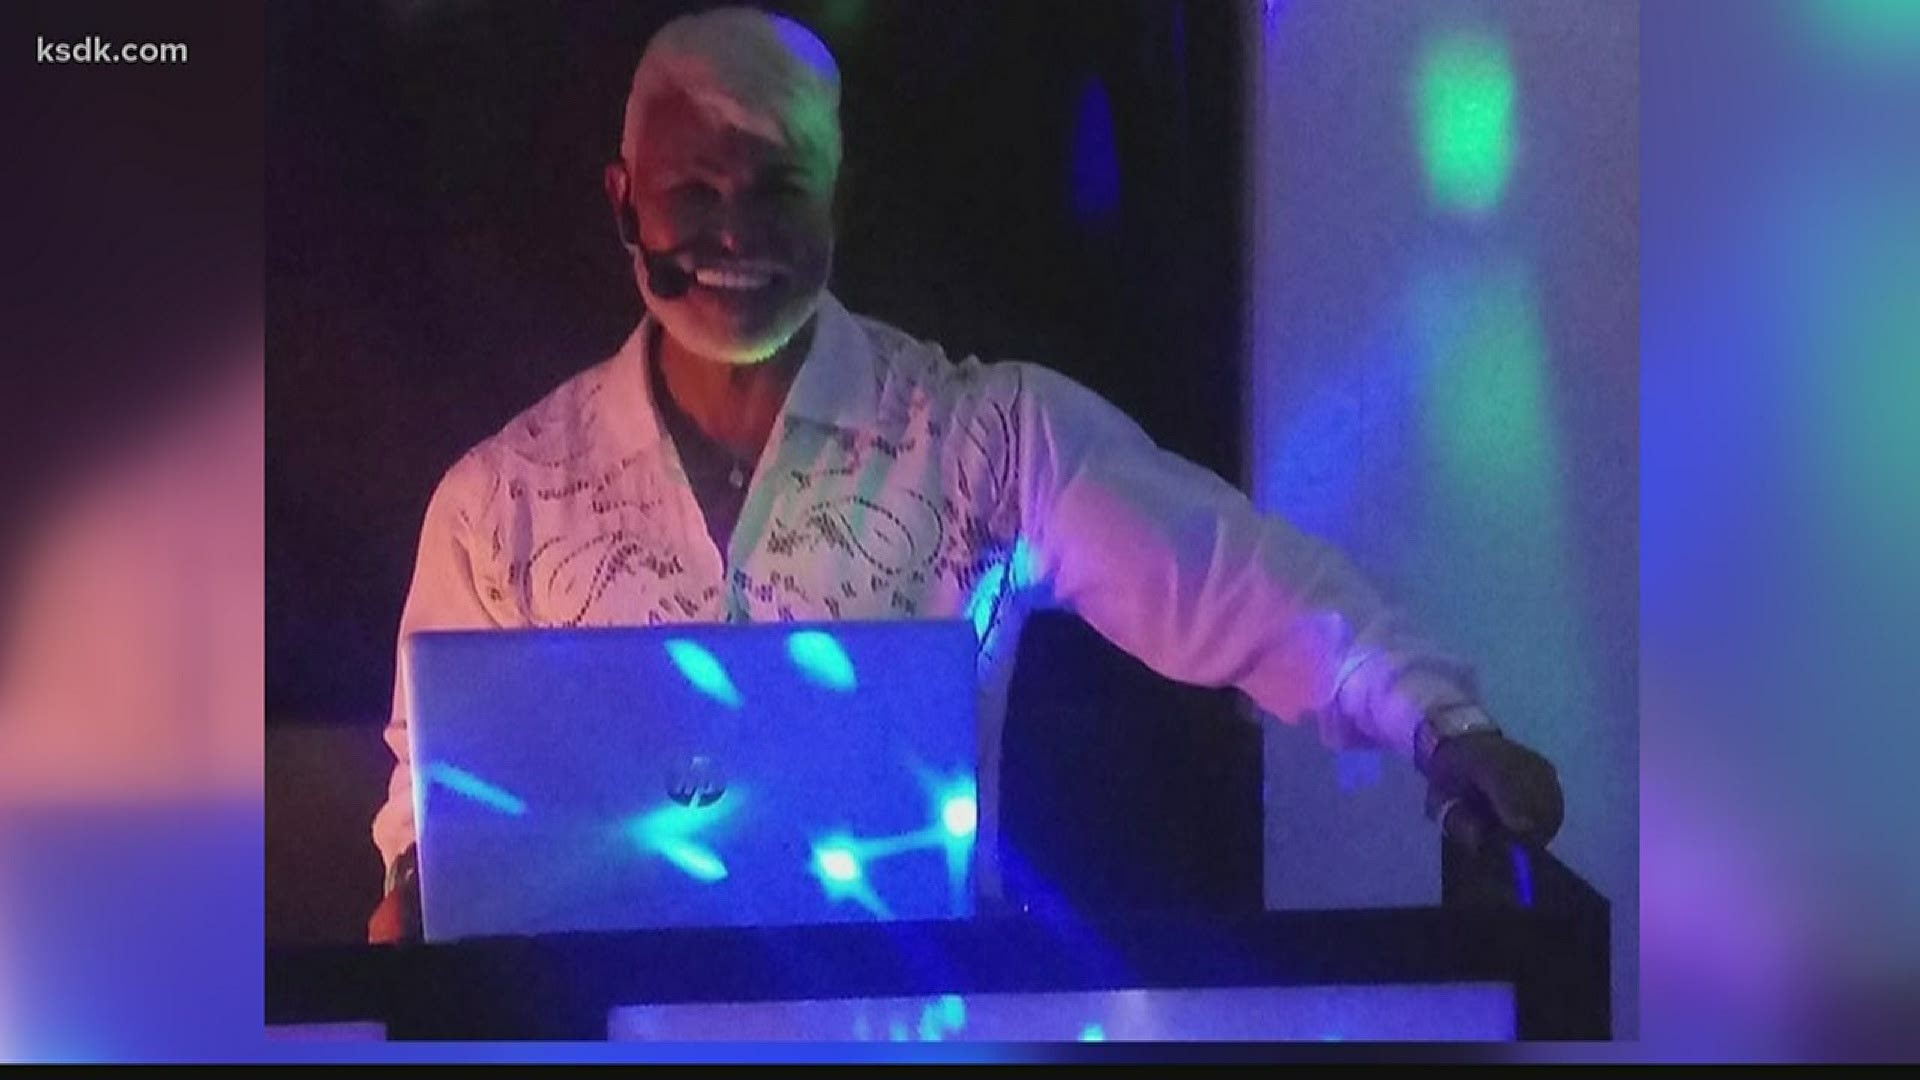 This local DJ wants to bring you good vibes and good music during the coronavirus pandemic